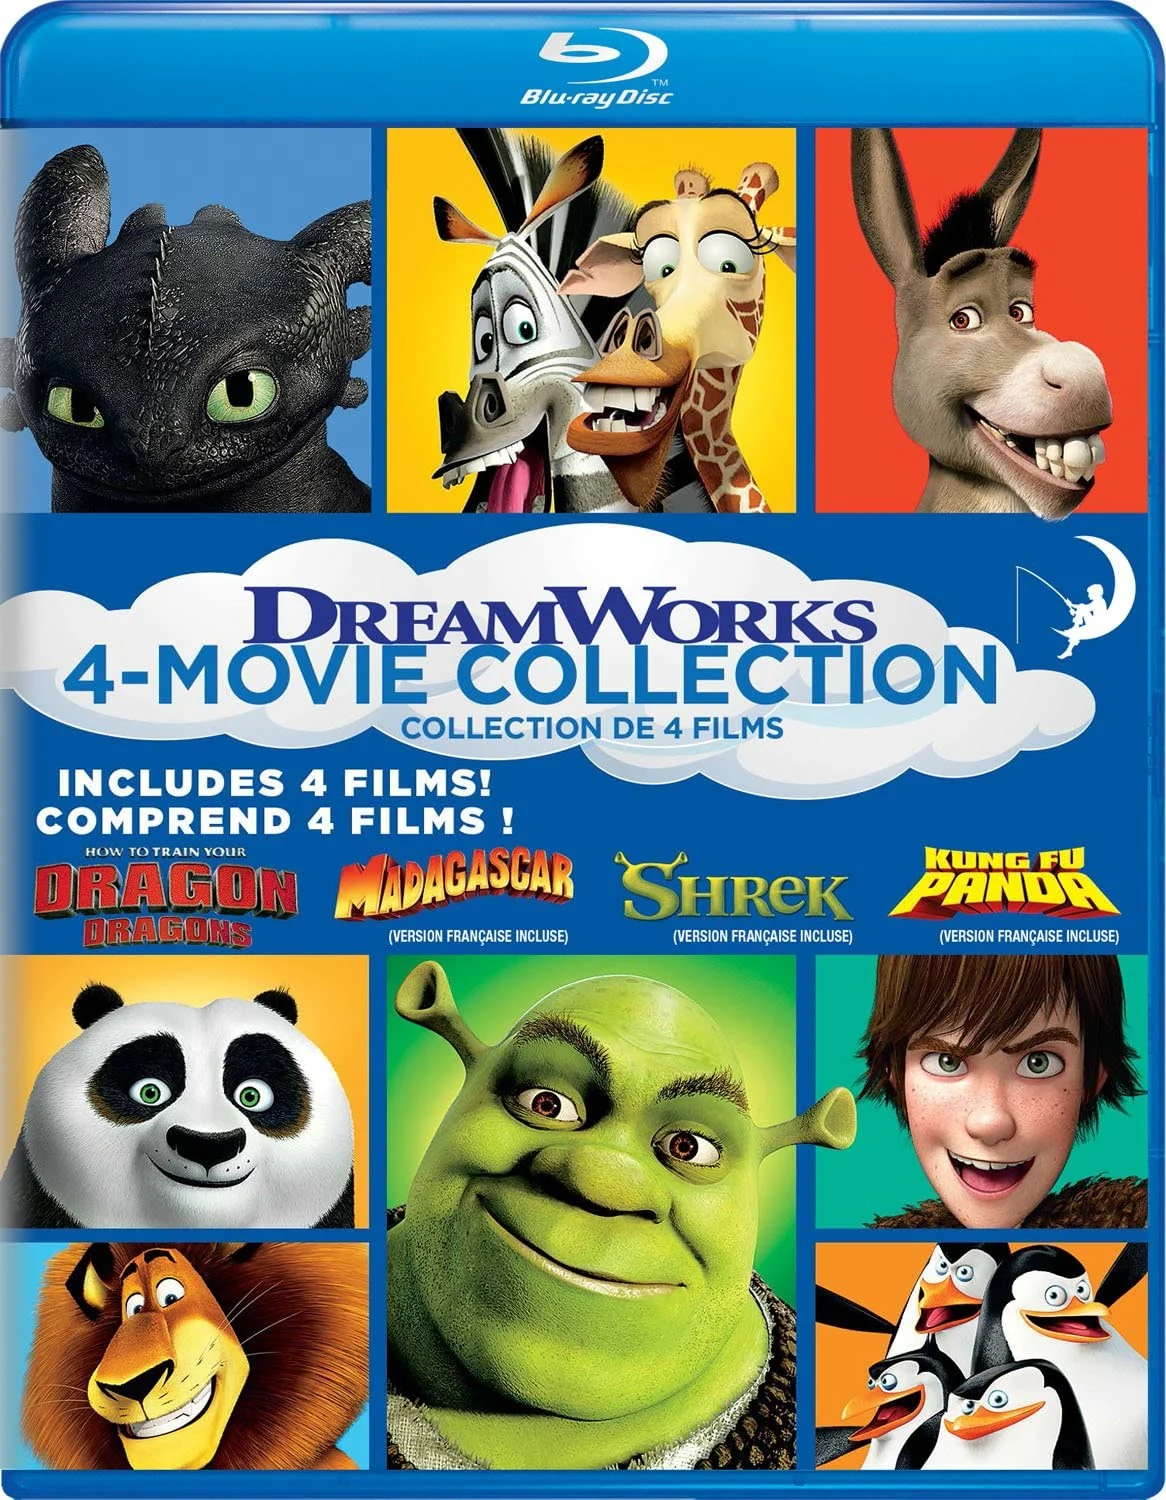 DreamWorks: 4-Movie Collection (Blu-ray)